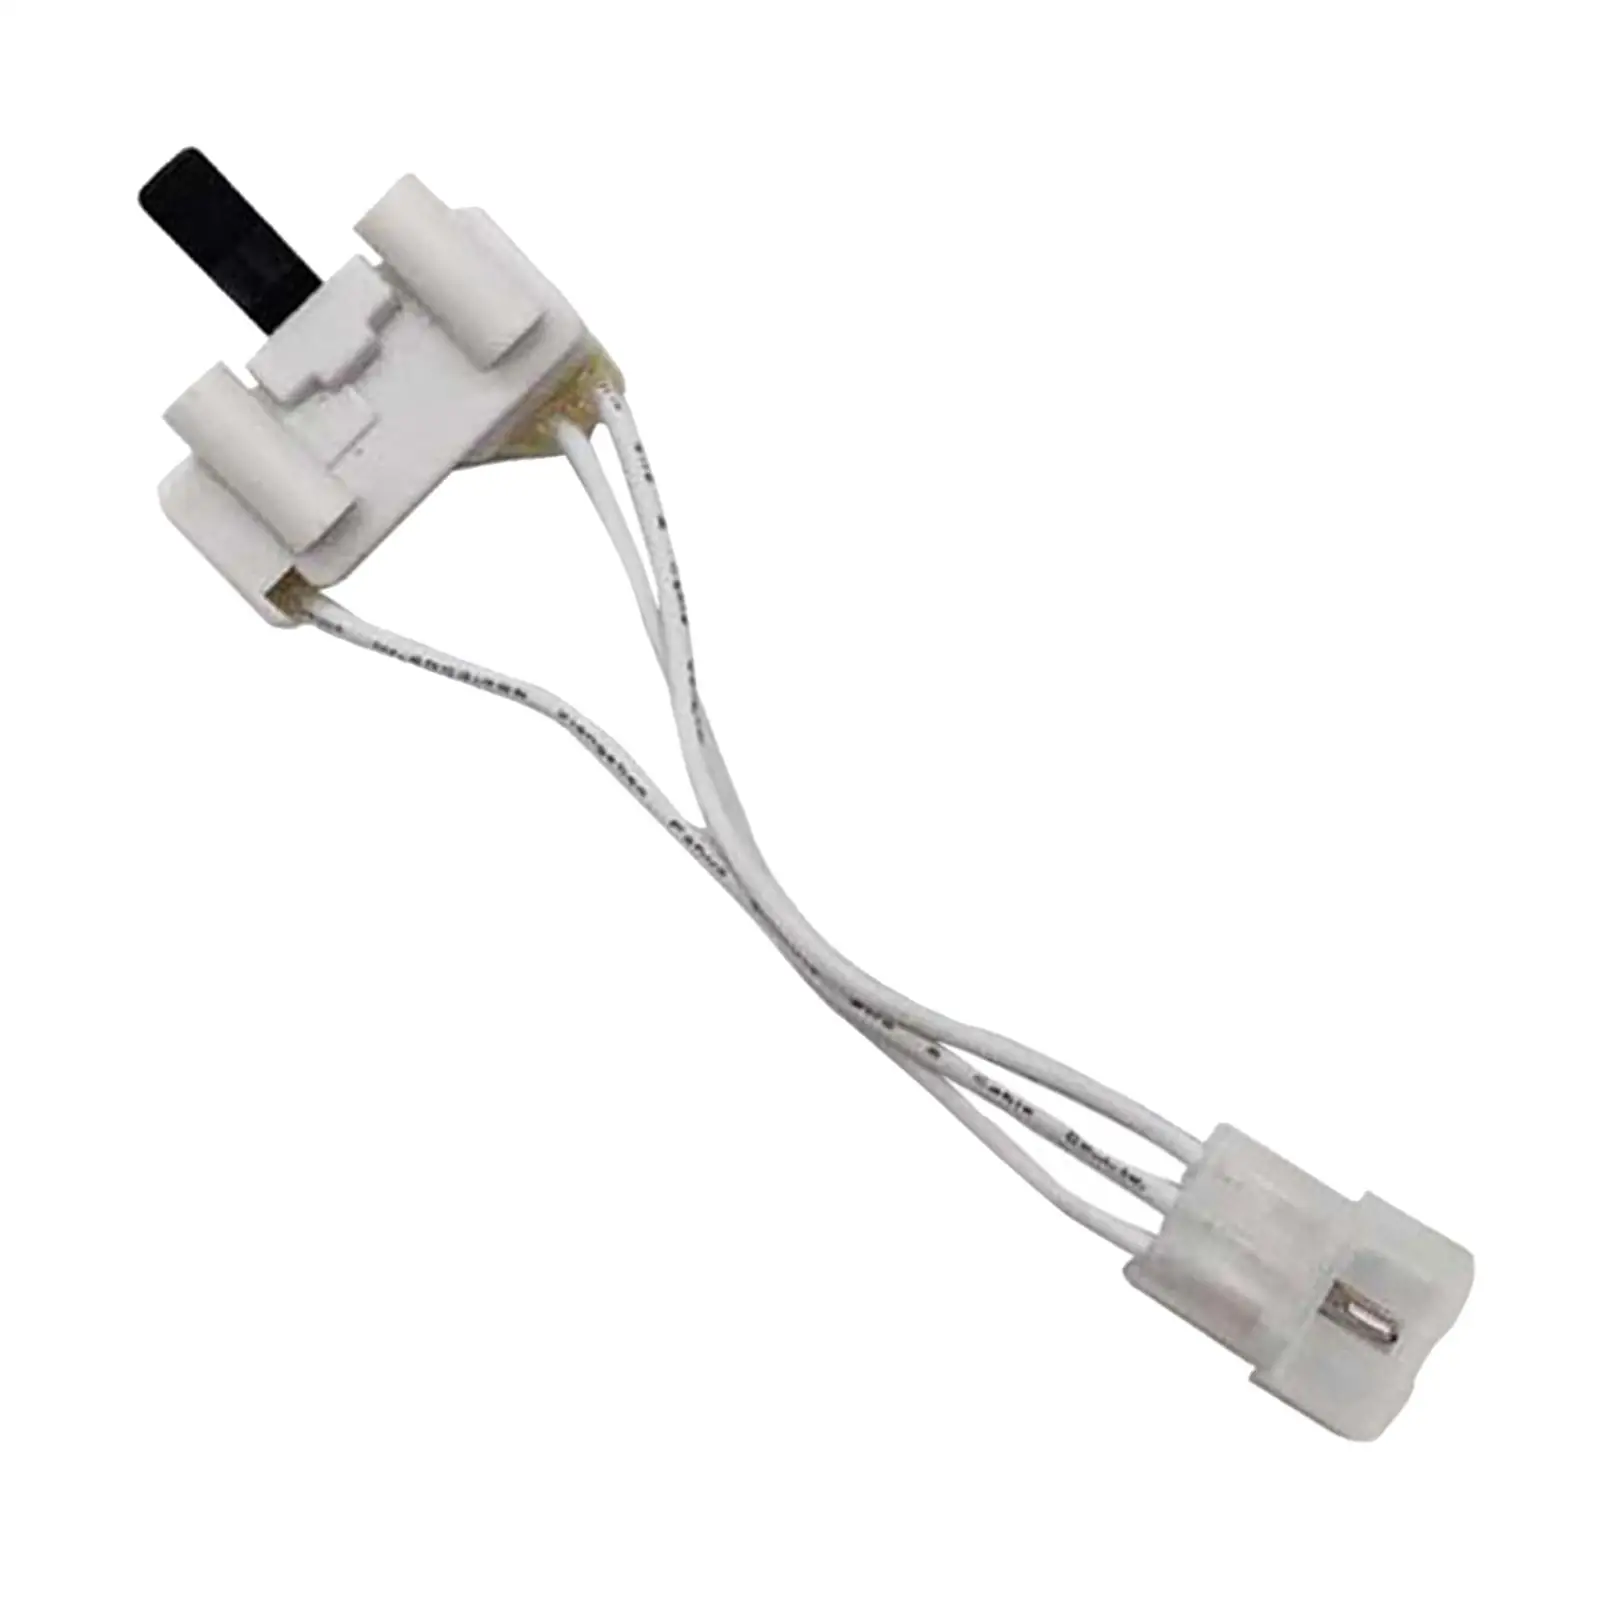 Door Switch Replacement Washing Machine Switch Accessory for 3406107 Washer